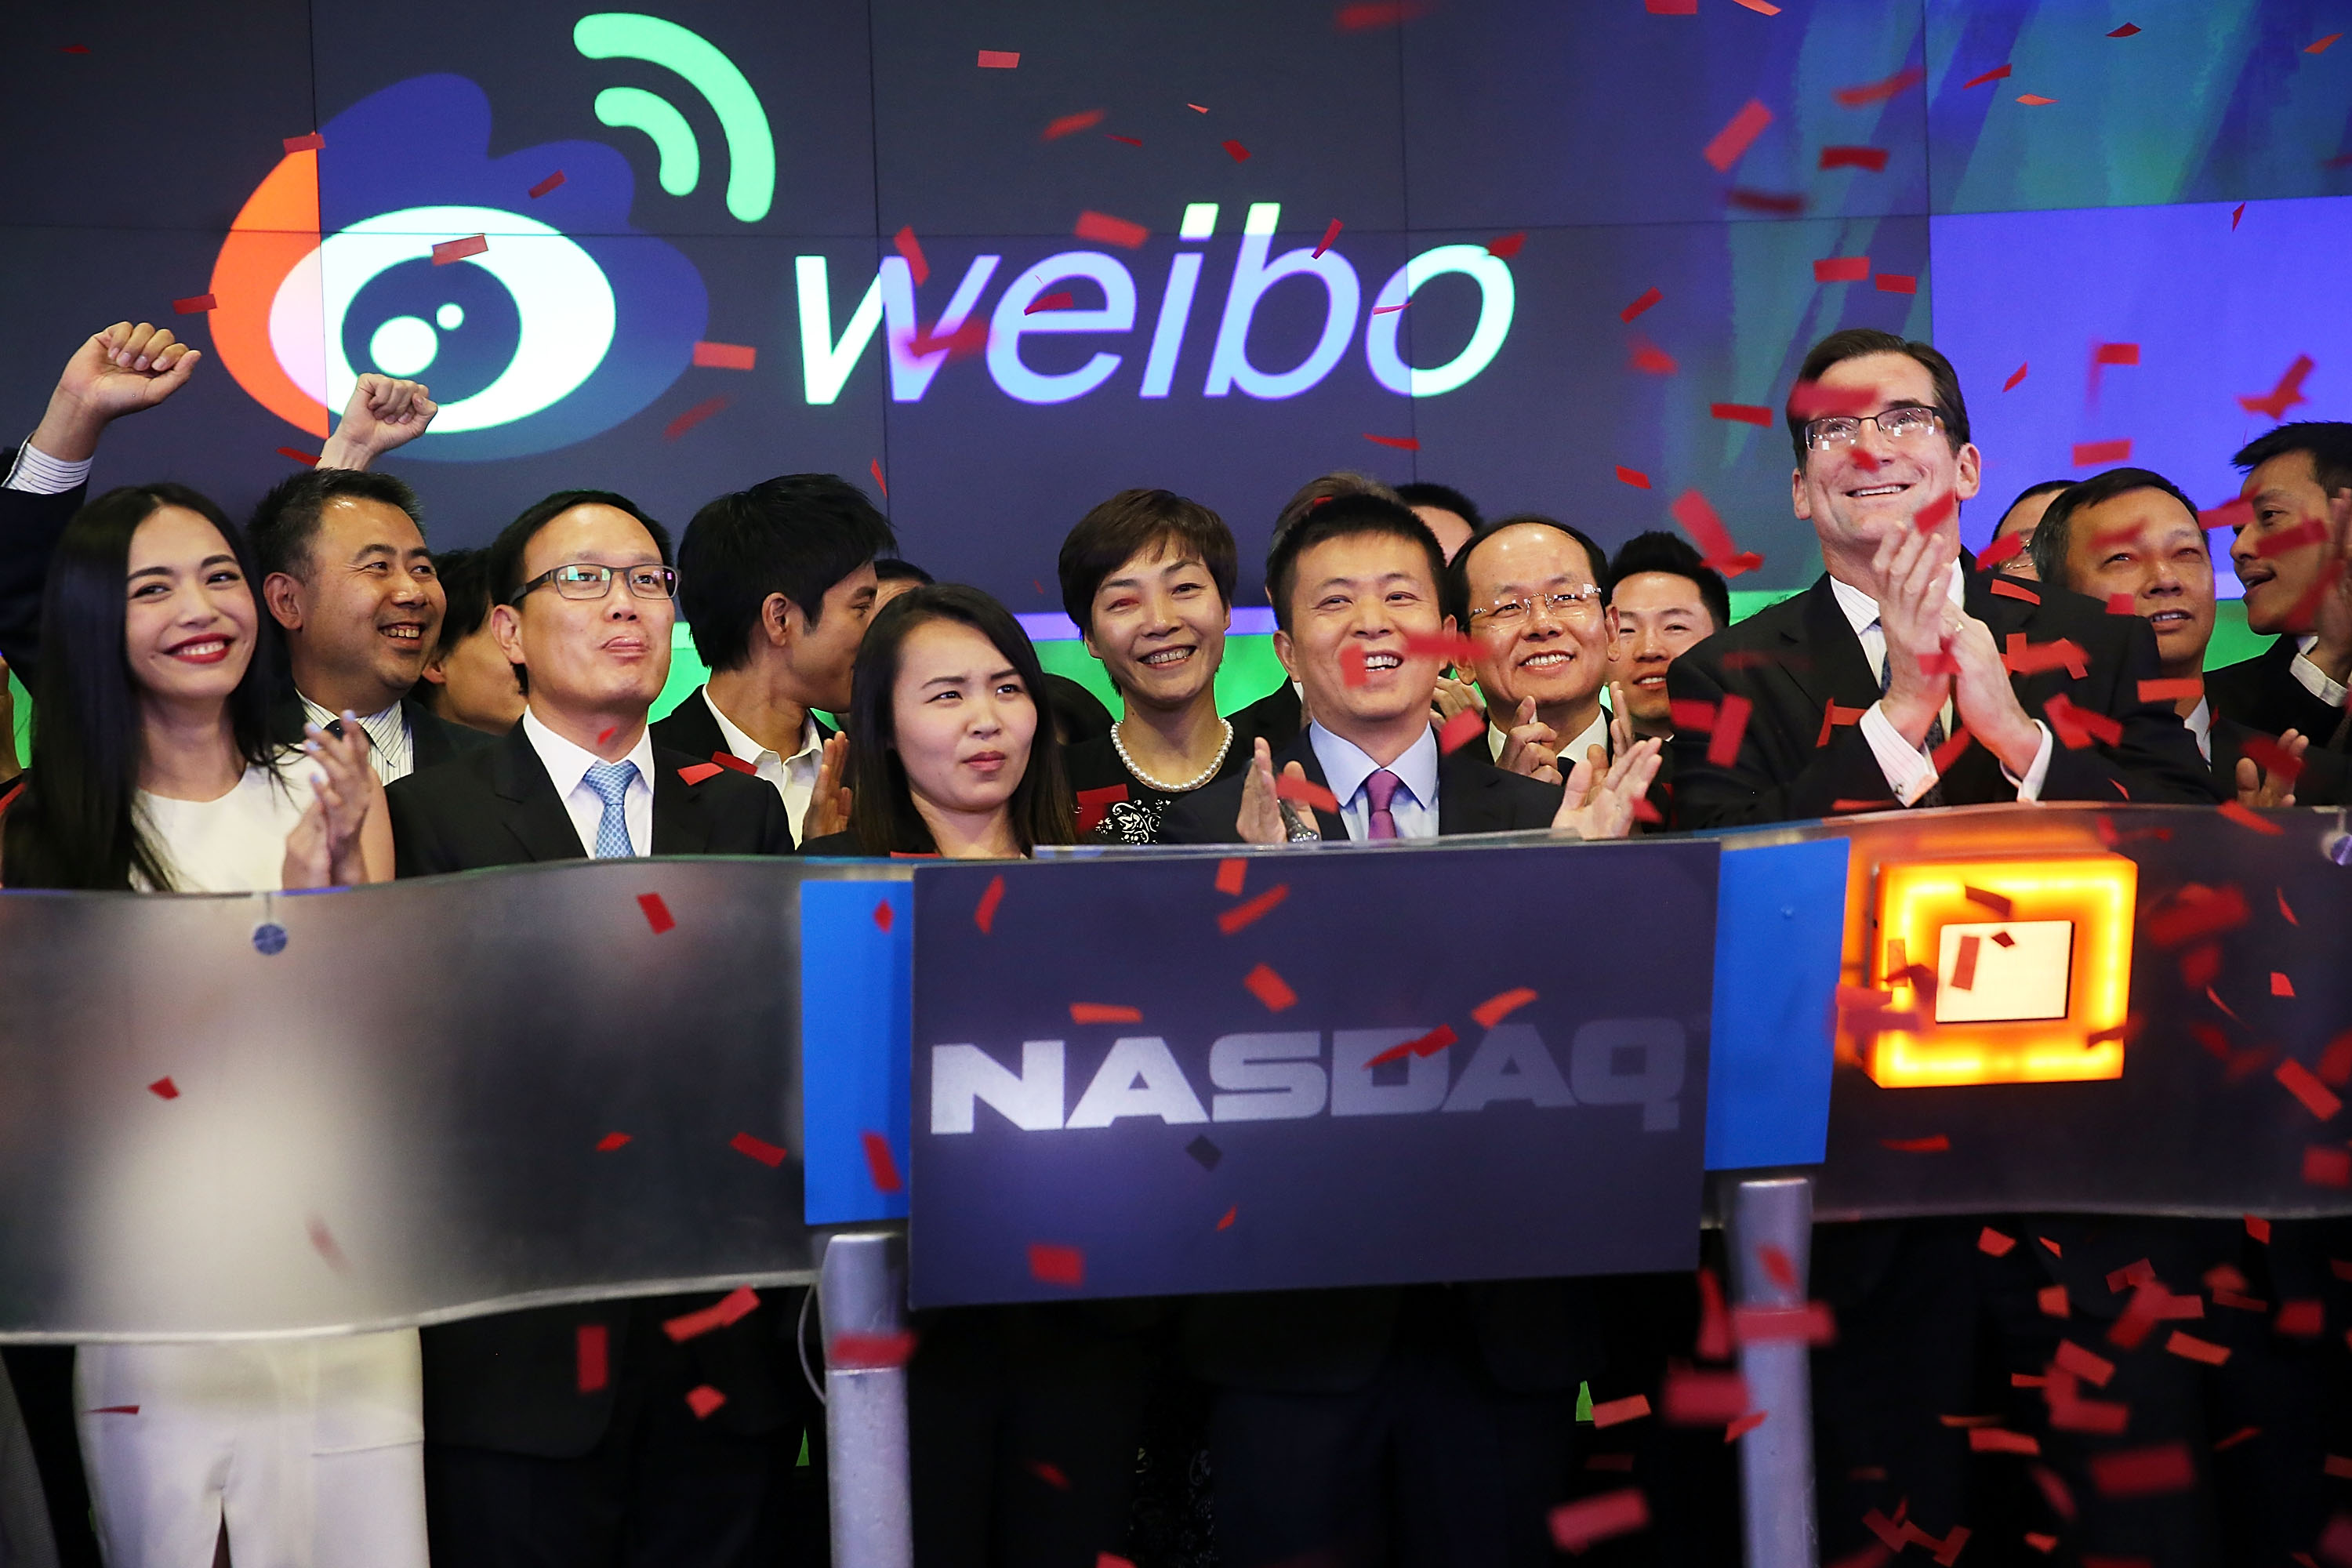 China's Weibo CEO Charles Chao (center) stands with Robert Greifeld, Nasdaq CEO, moments after Weibo began trading on the Nasdaq exchange under the ticker symbol WB on April 17, 2014 in New York City. (Spencer Platt—Getty Images)